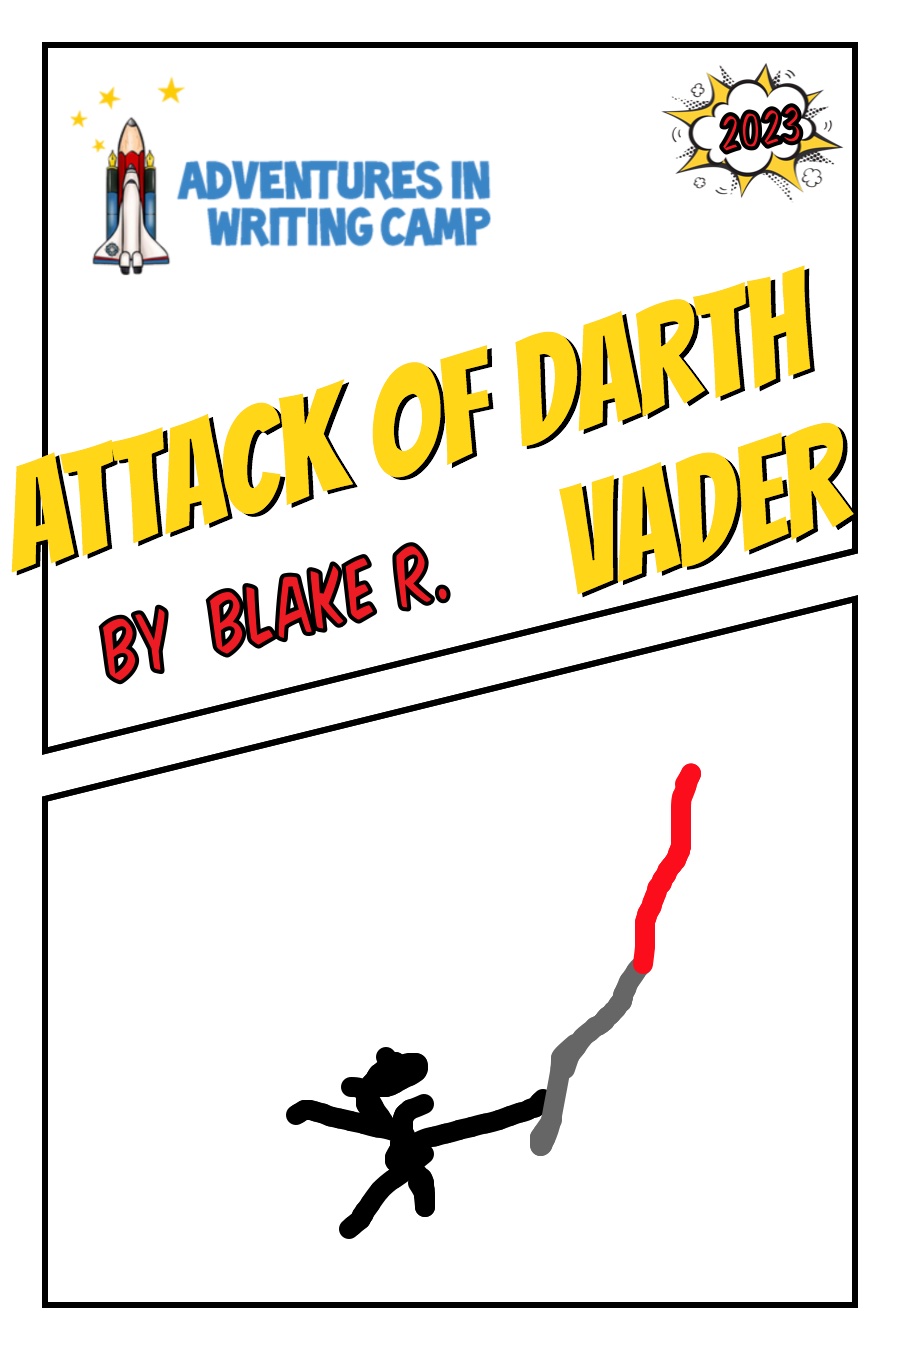 The Attack of Darth Vader by Blake R